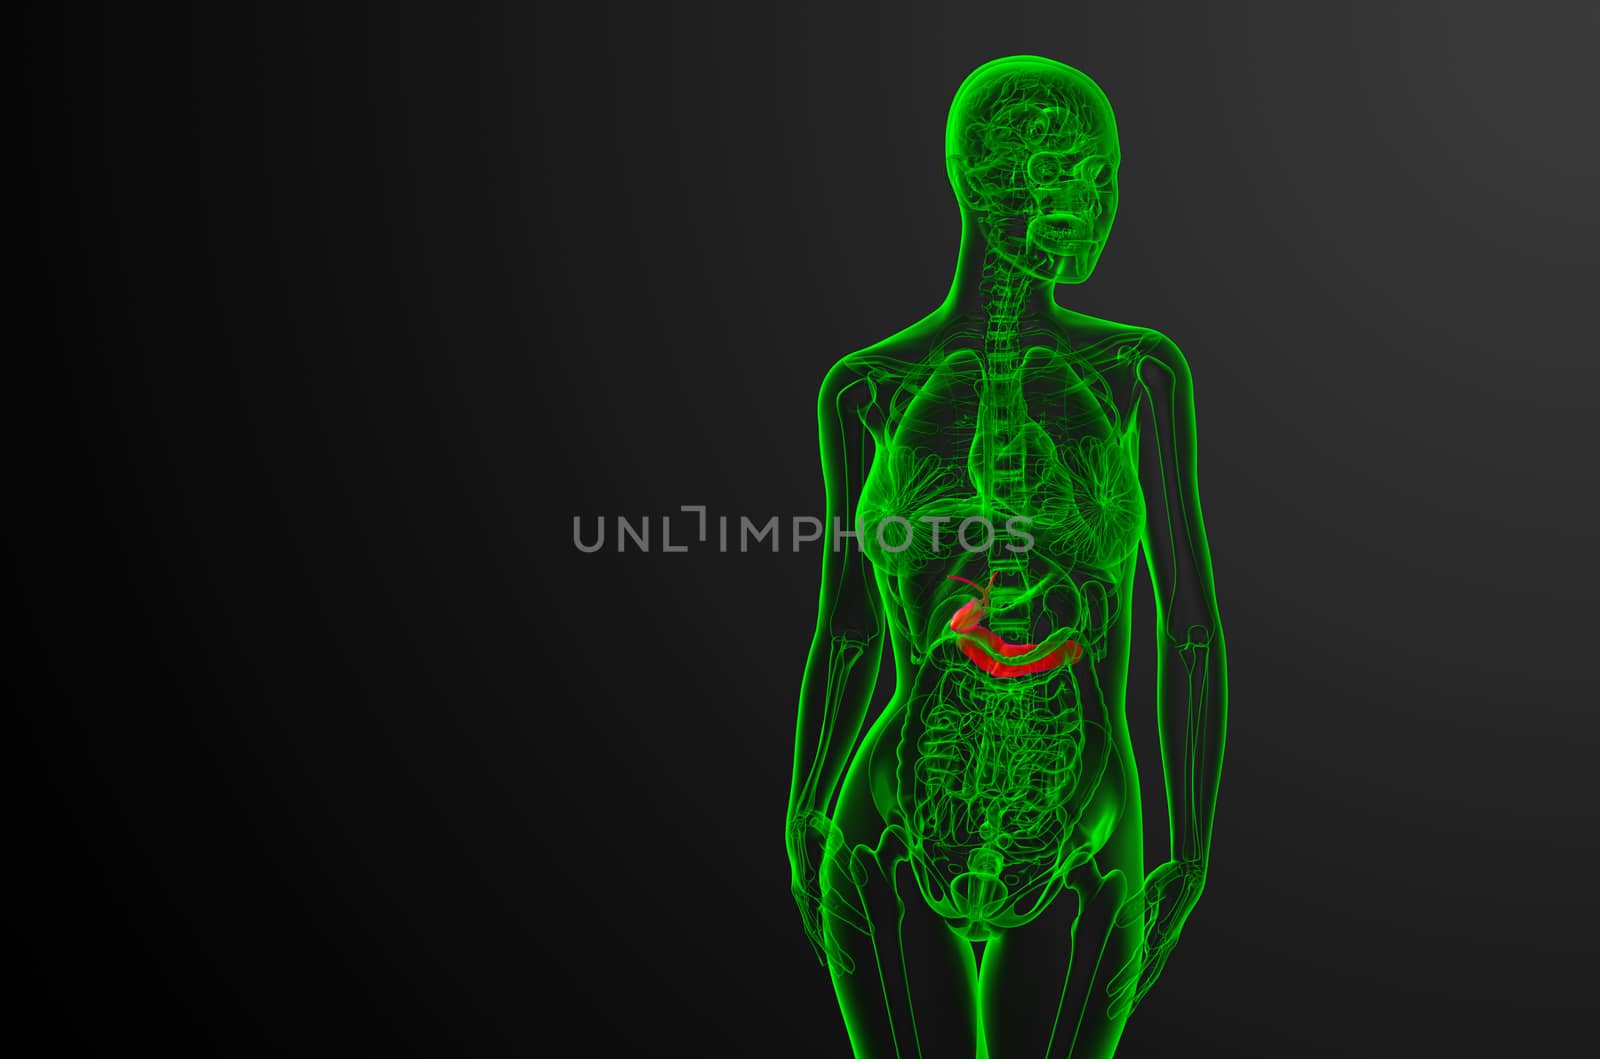 3d render medical illustration of the gallblader and pancrease - front view